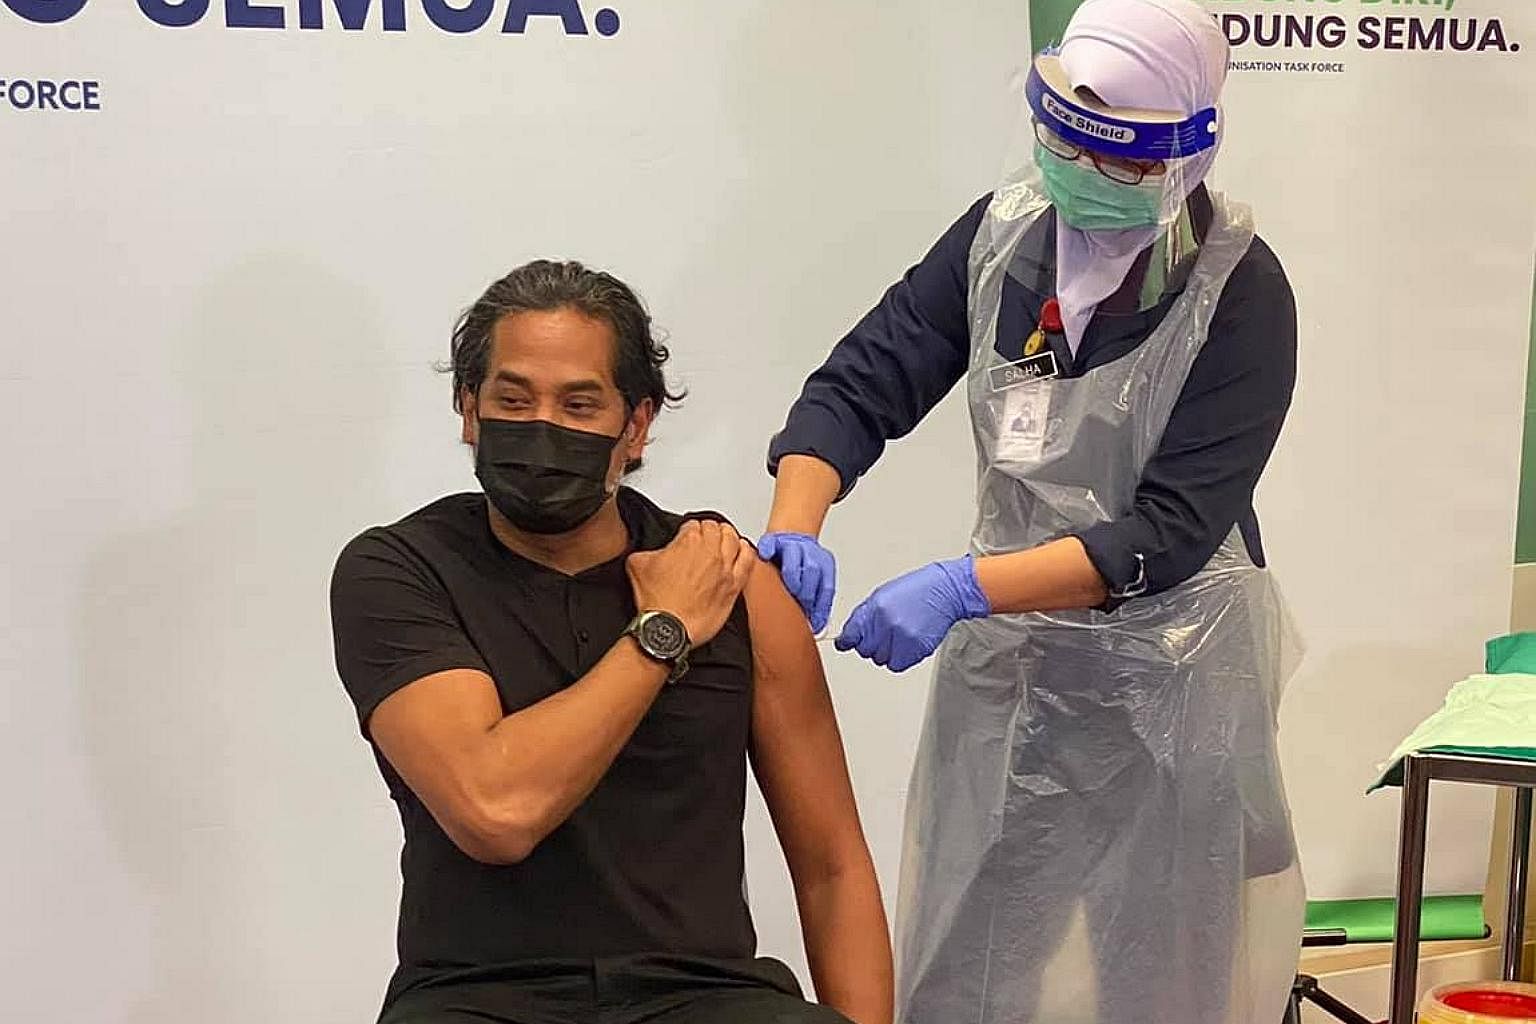 Minister Khairy Jamaluddin first in Malaysia to get Sinovac jab against Covid-19, SE Asia News &amp; Top Stories - The Straits Times